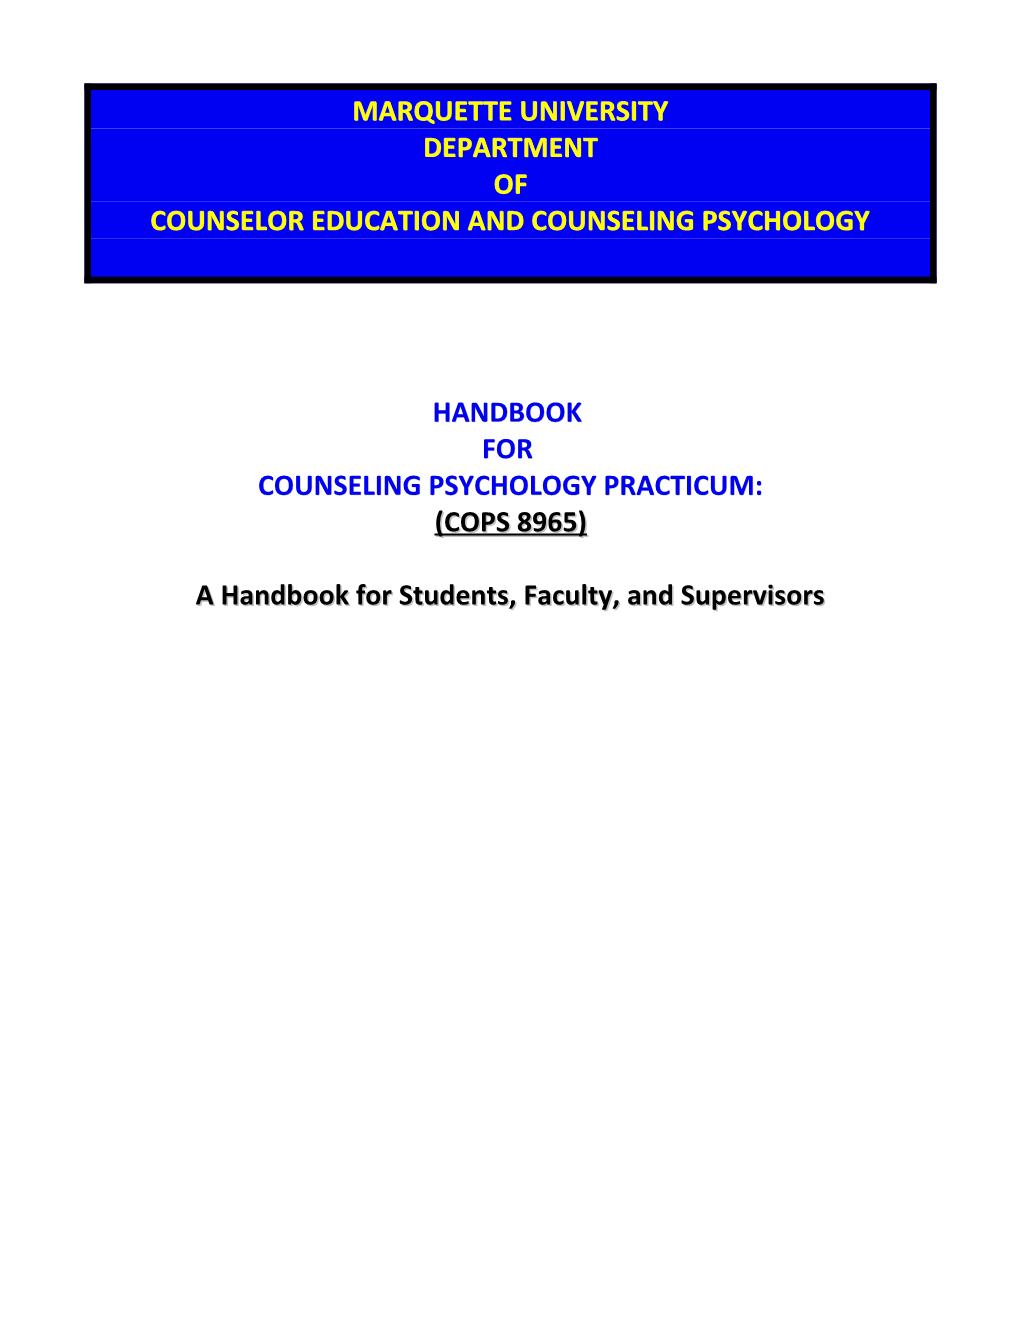 Counselor Education and Counseling Psychology